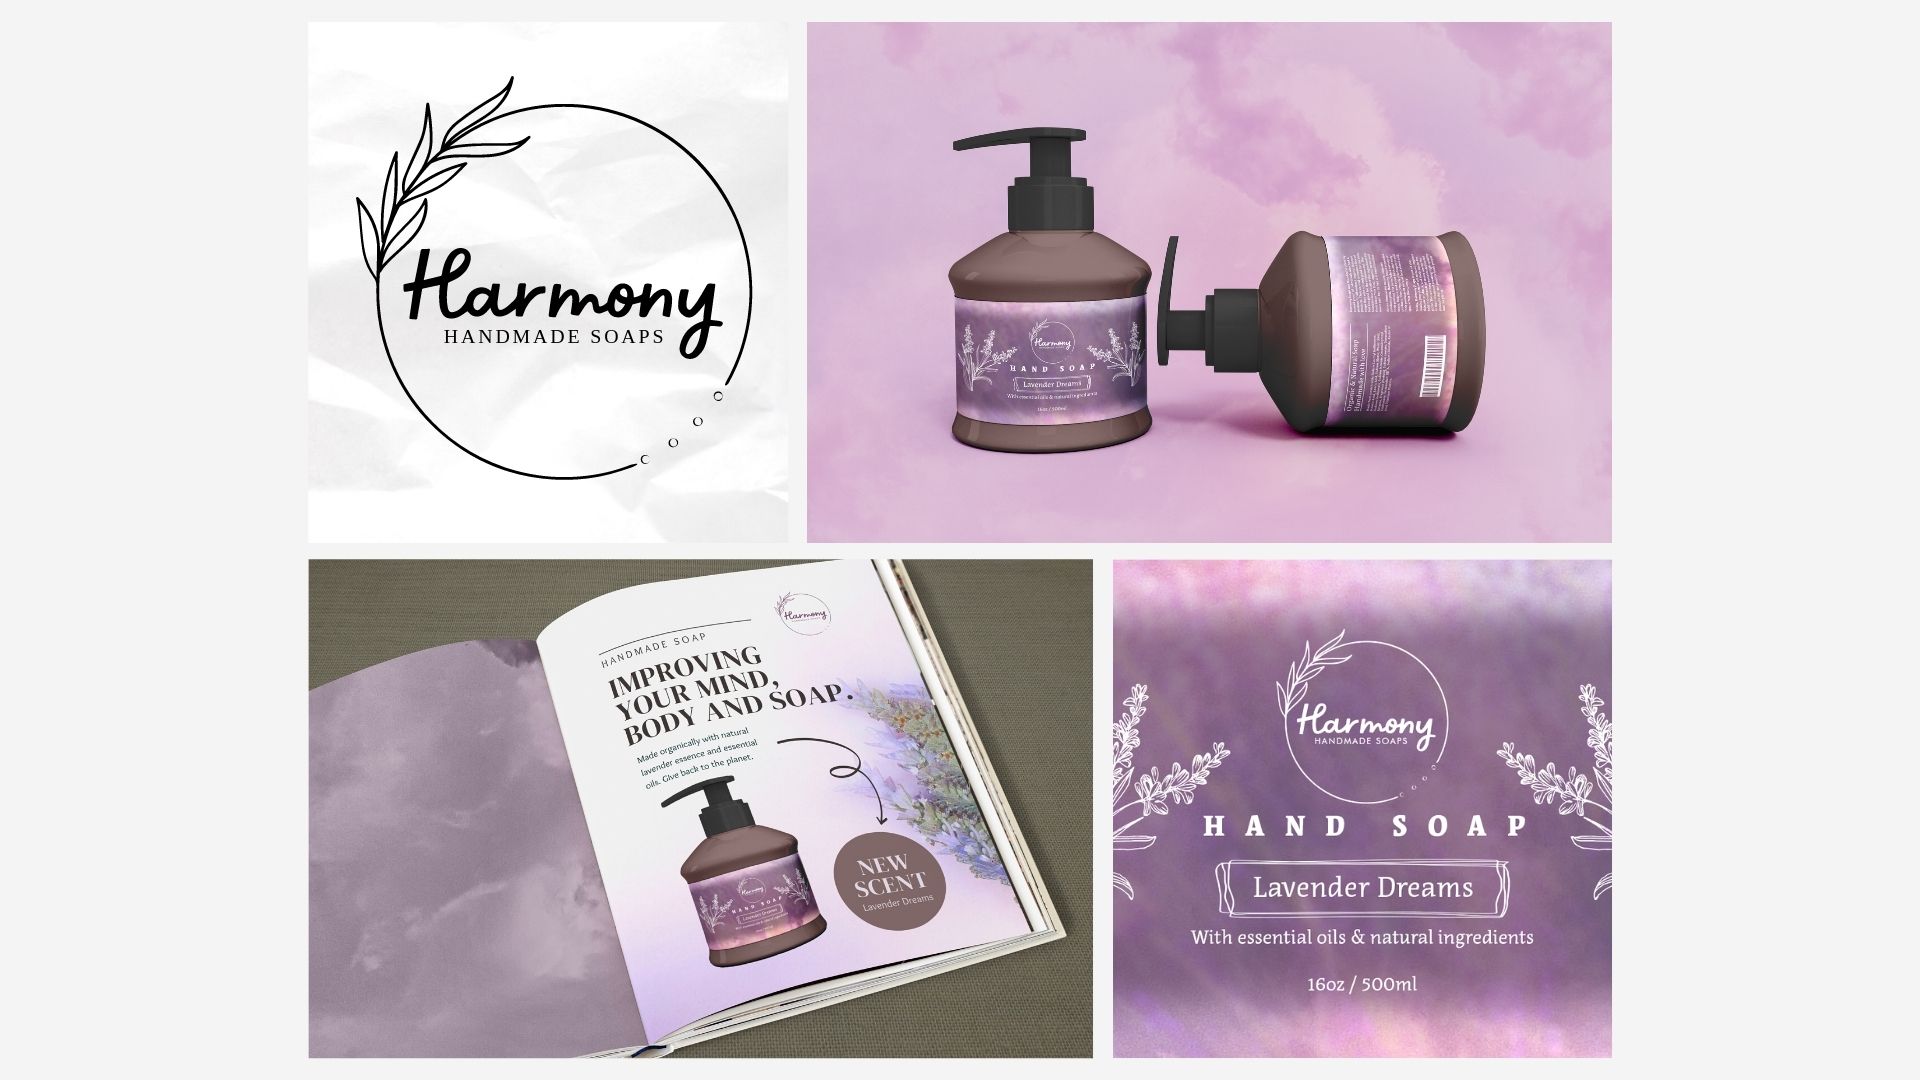 "Harmony Soaps Branding" / "Harmony Soaps Branding", soap label & magazine advertisement, 3x2.5 (label) & 8.5x11 (advertisement) printed, 2023. Harmony Soaps is a fictional soap brand focused on environmentally-friendly ingredients and giving back to the planet.